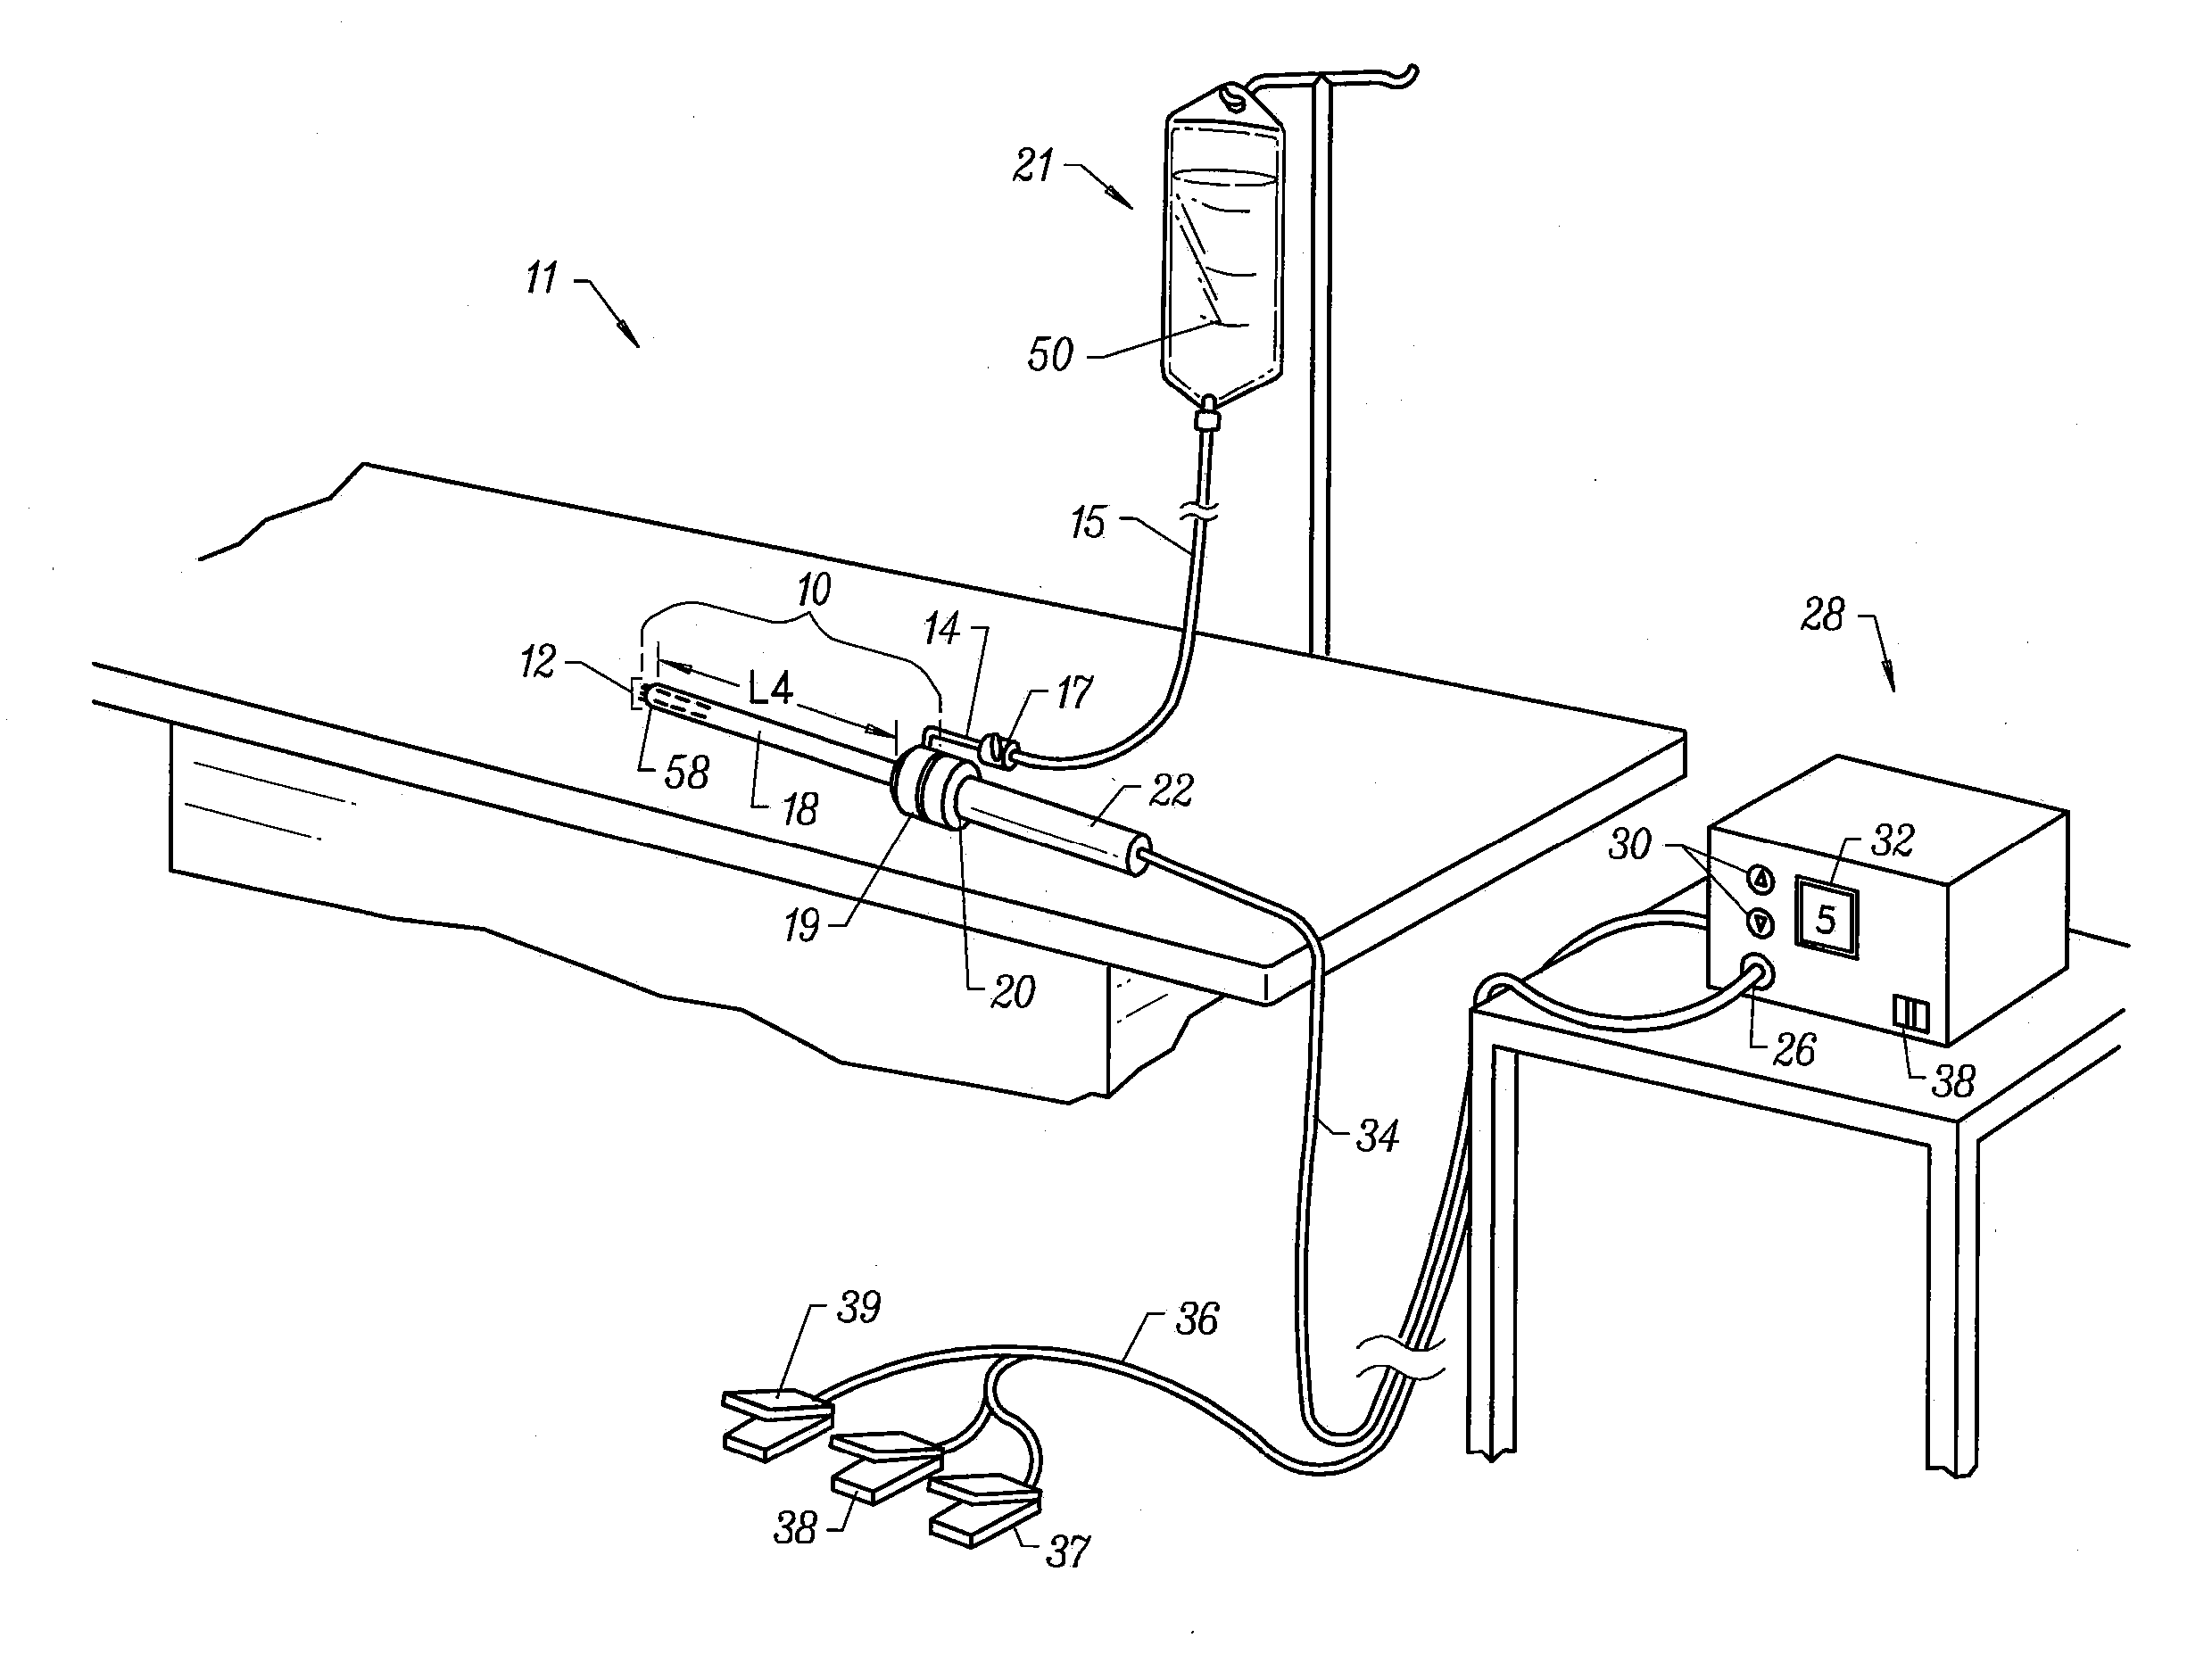 Systems and methods for electrosurgical spine surgery